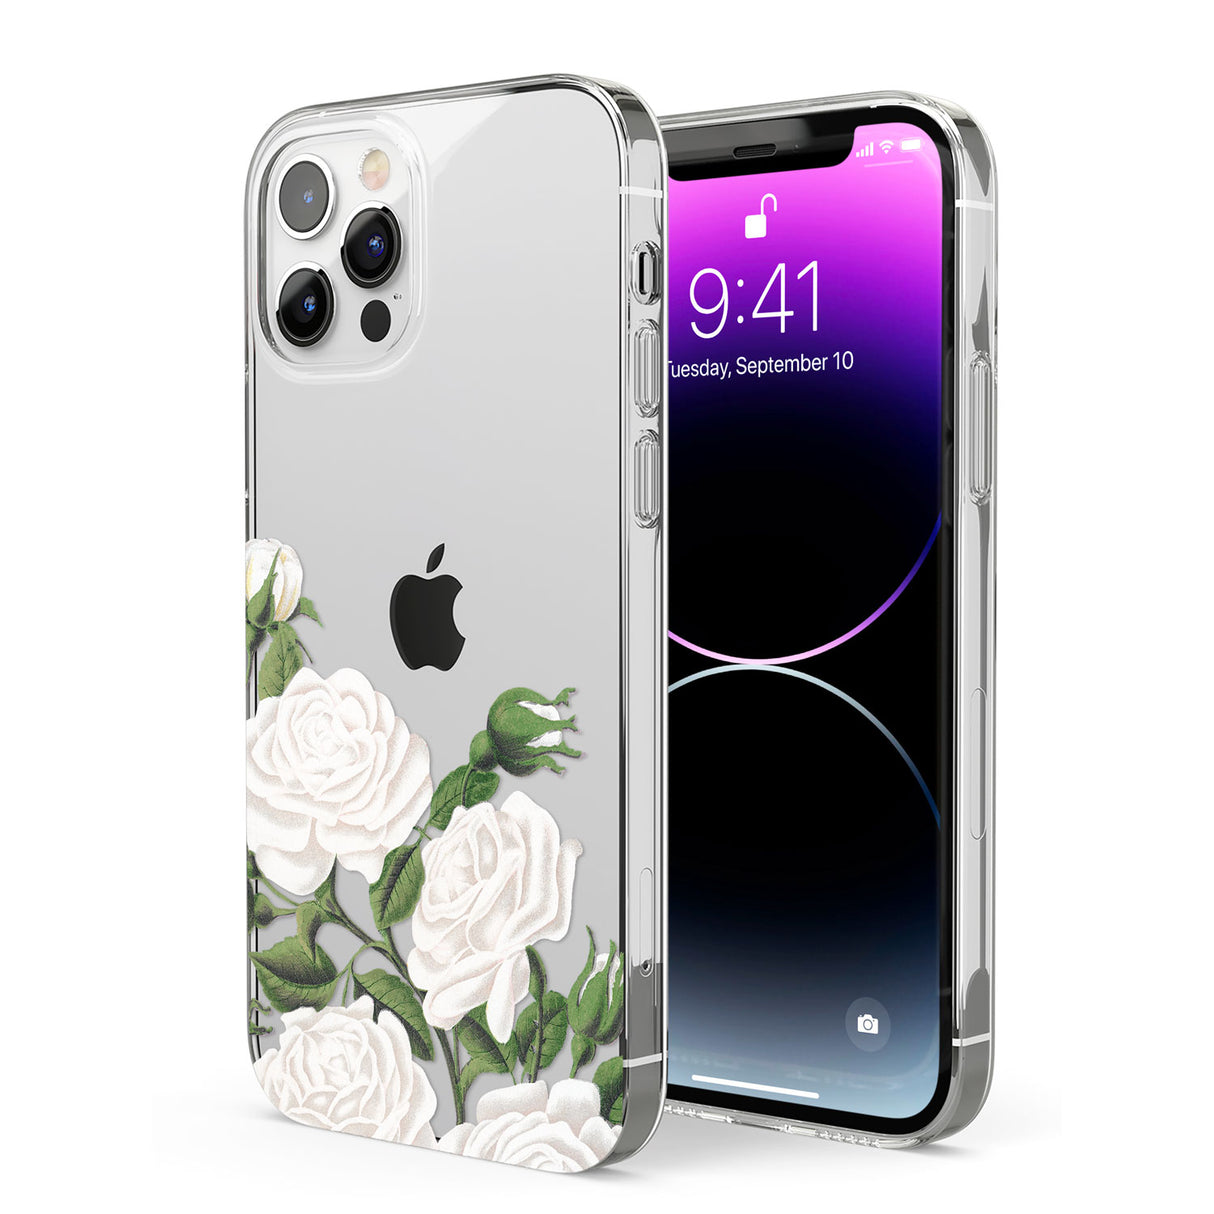 White Vintage Painted Flowers Phone Case for iPhone 12 Pro